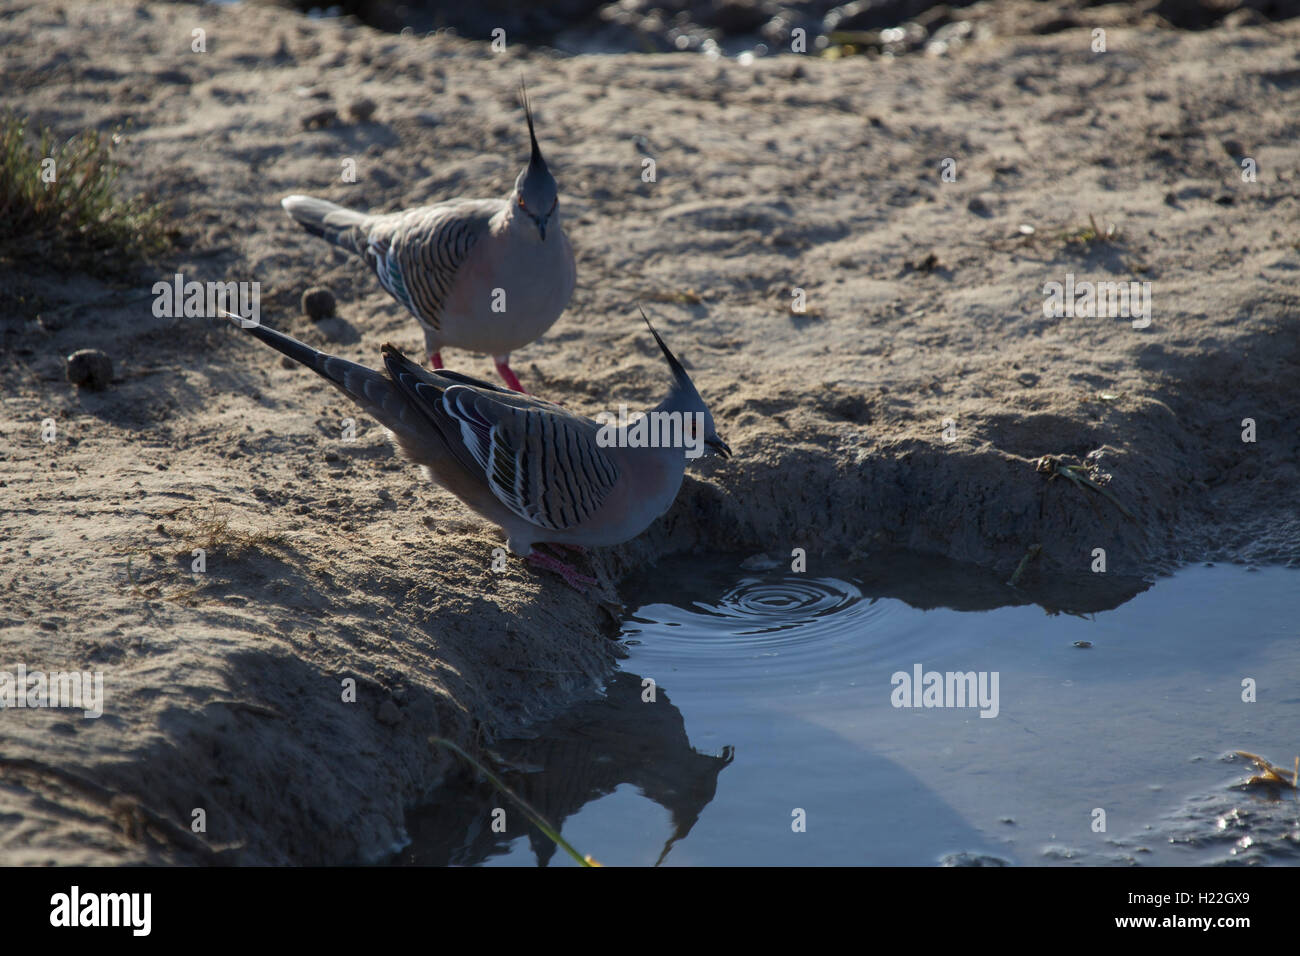 A pair of crested pigeons drinking water at Mungo National Park New South Wales Australia Stock Photo